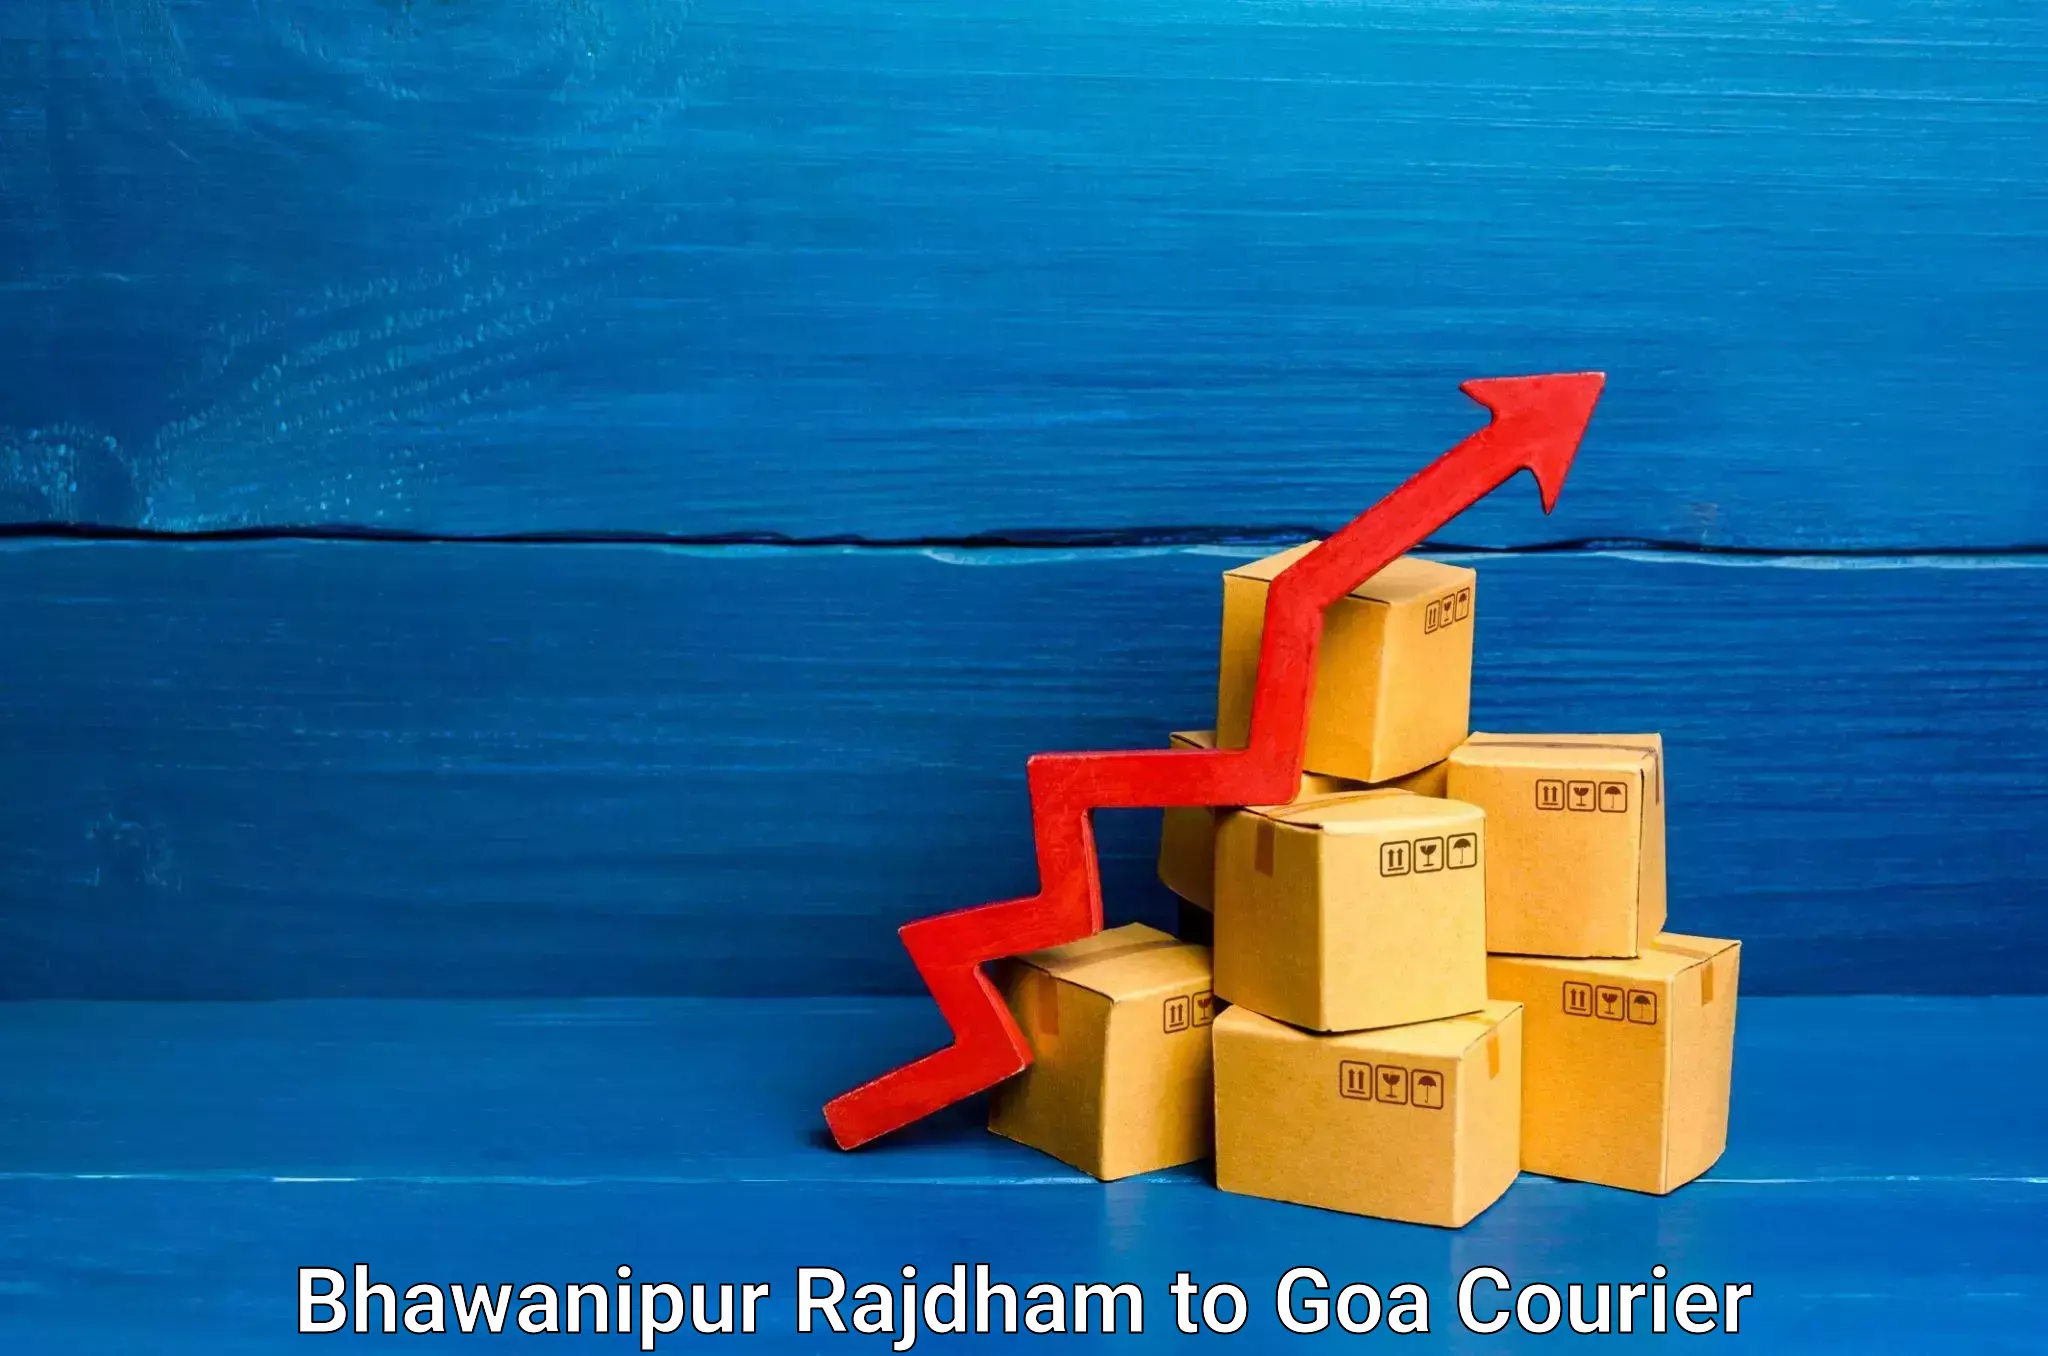 Furniture delivery service Bhawanipur Rajdham to South Goa